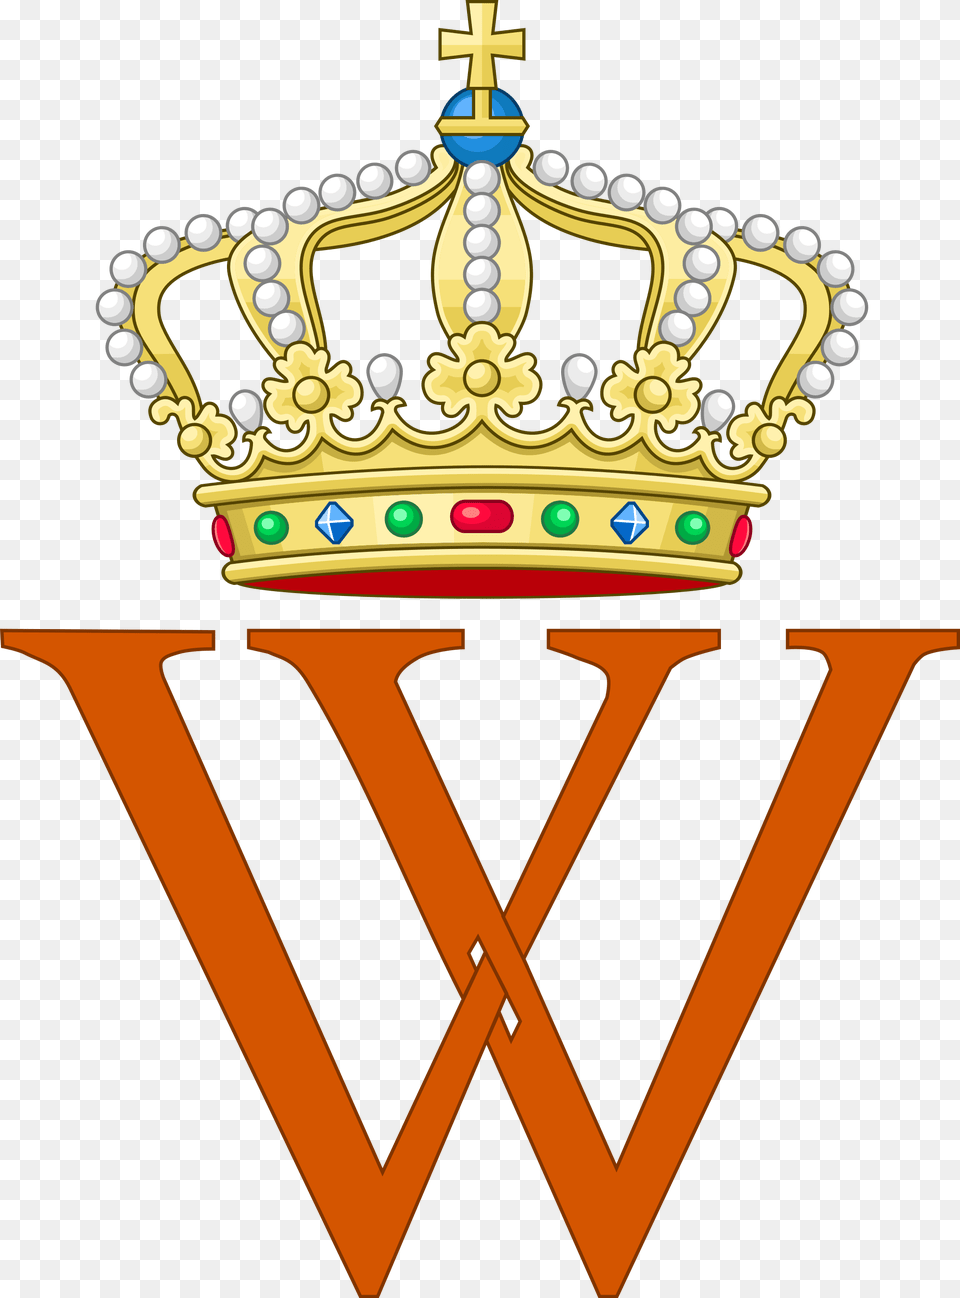 Royal Monogram Of King Willem I Of The Netherlands Royal Cypher William Iii Amp Ii, Accessories, Crown, Jewelry, Cross Png Image